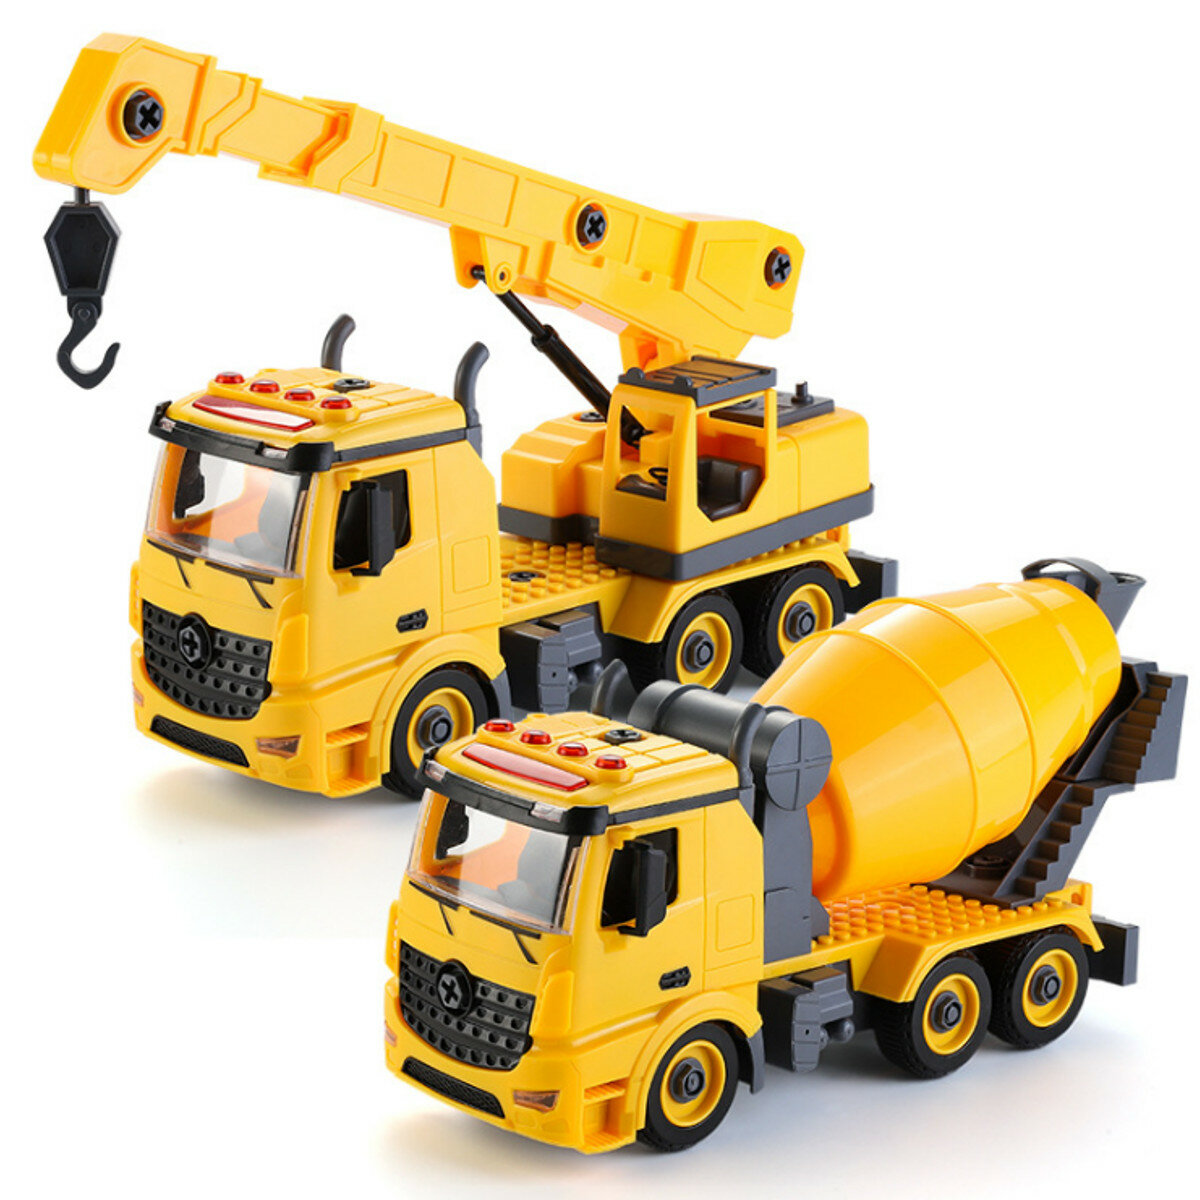 

Simulation DIY Nut Disassembly Loading Unloading Assembly Engineering Truck Excavator Bulldozer Car Model Toy with LED L